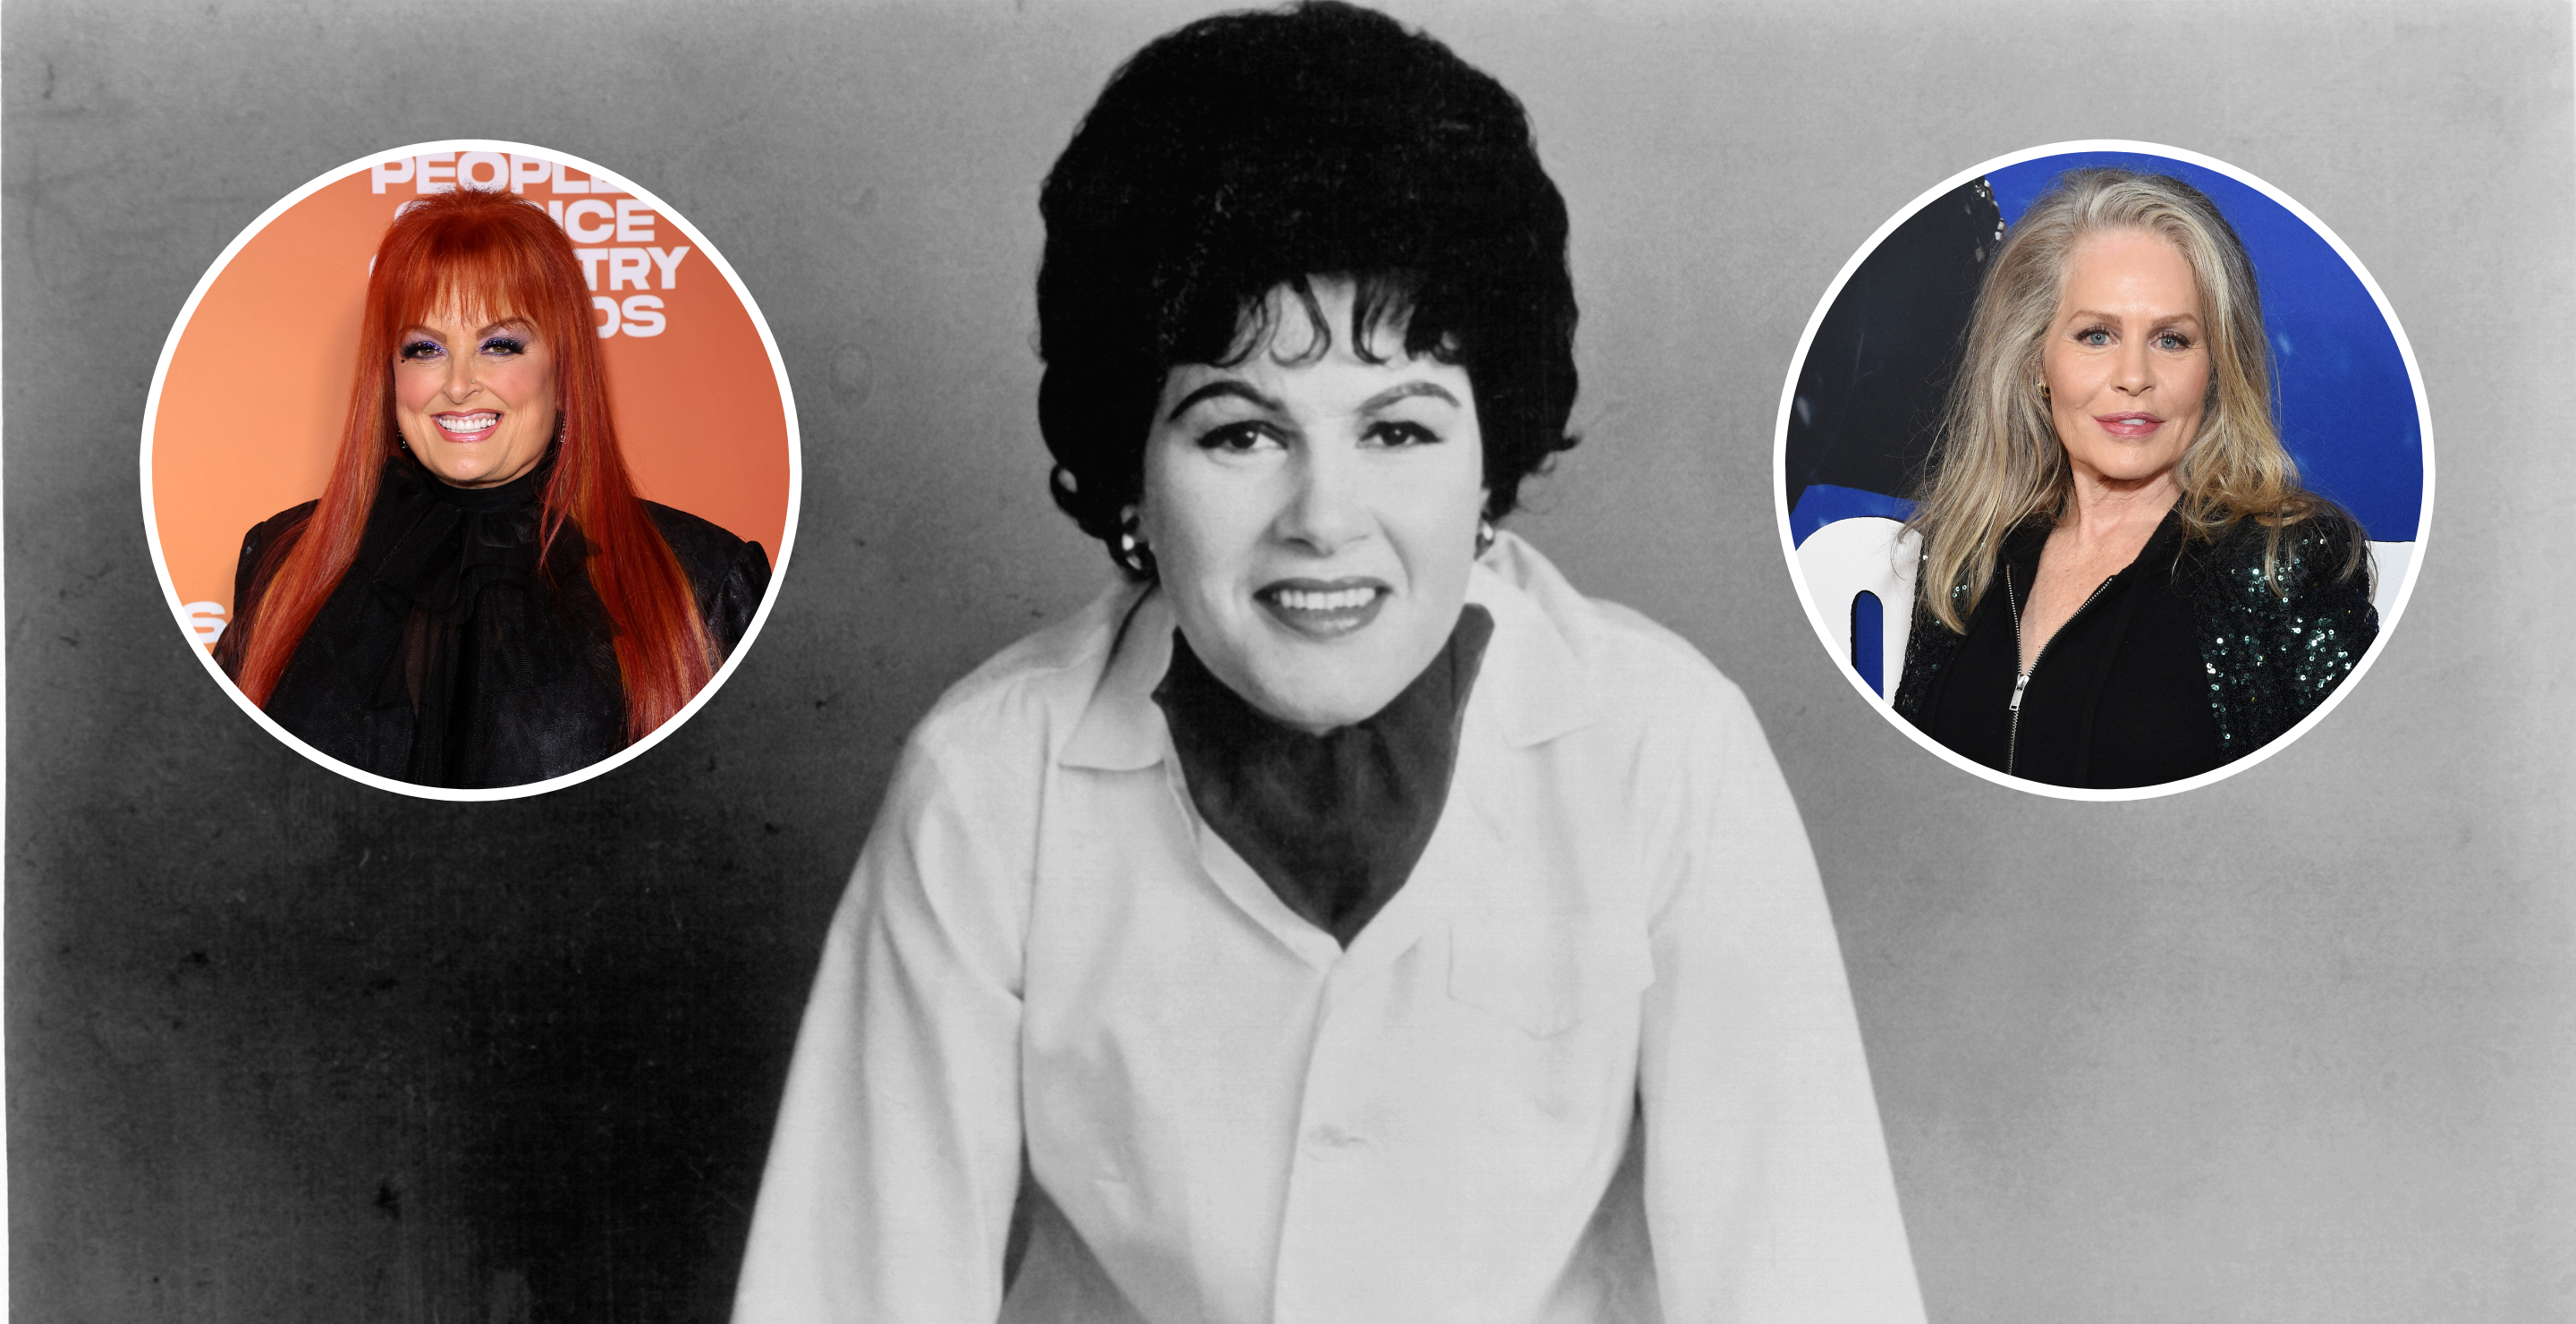 UNSPECIFIED - CIRCA 1970: Photo of Patsy Cline; NASHVILLE, TENNESSEE - SEPTEMBER 28: Wynonna Judd attends the 2023 People's Choice Country Awards at The Grand Ole Opry on September 28, 2023 in Nashville, Tennessee.; and Beverly D'Angelo at the premiere of "Violent Night" held at TCL Chinese Theatre on November 29, 2022 in Los Angeles, California.